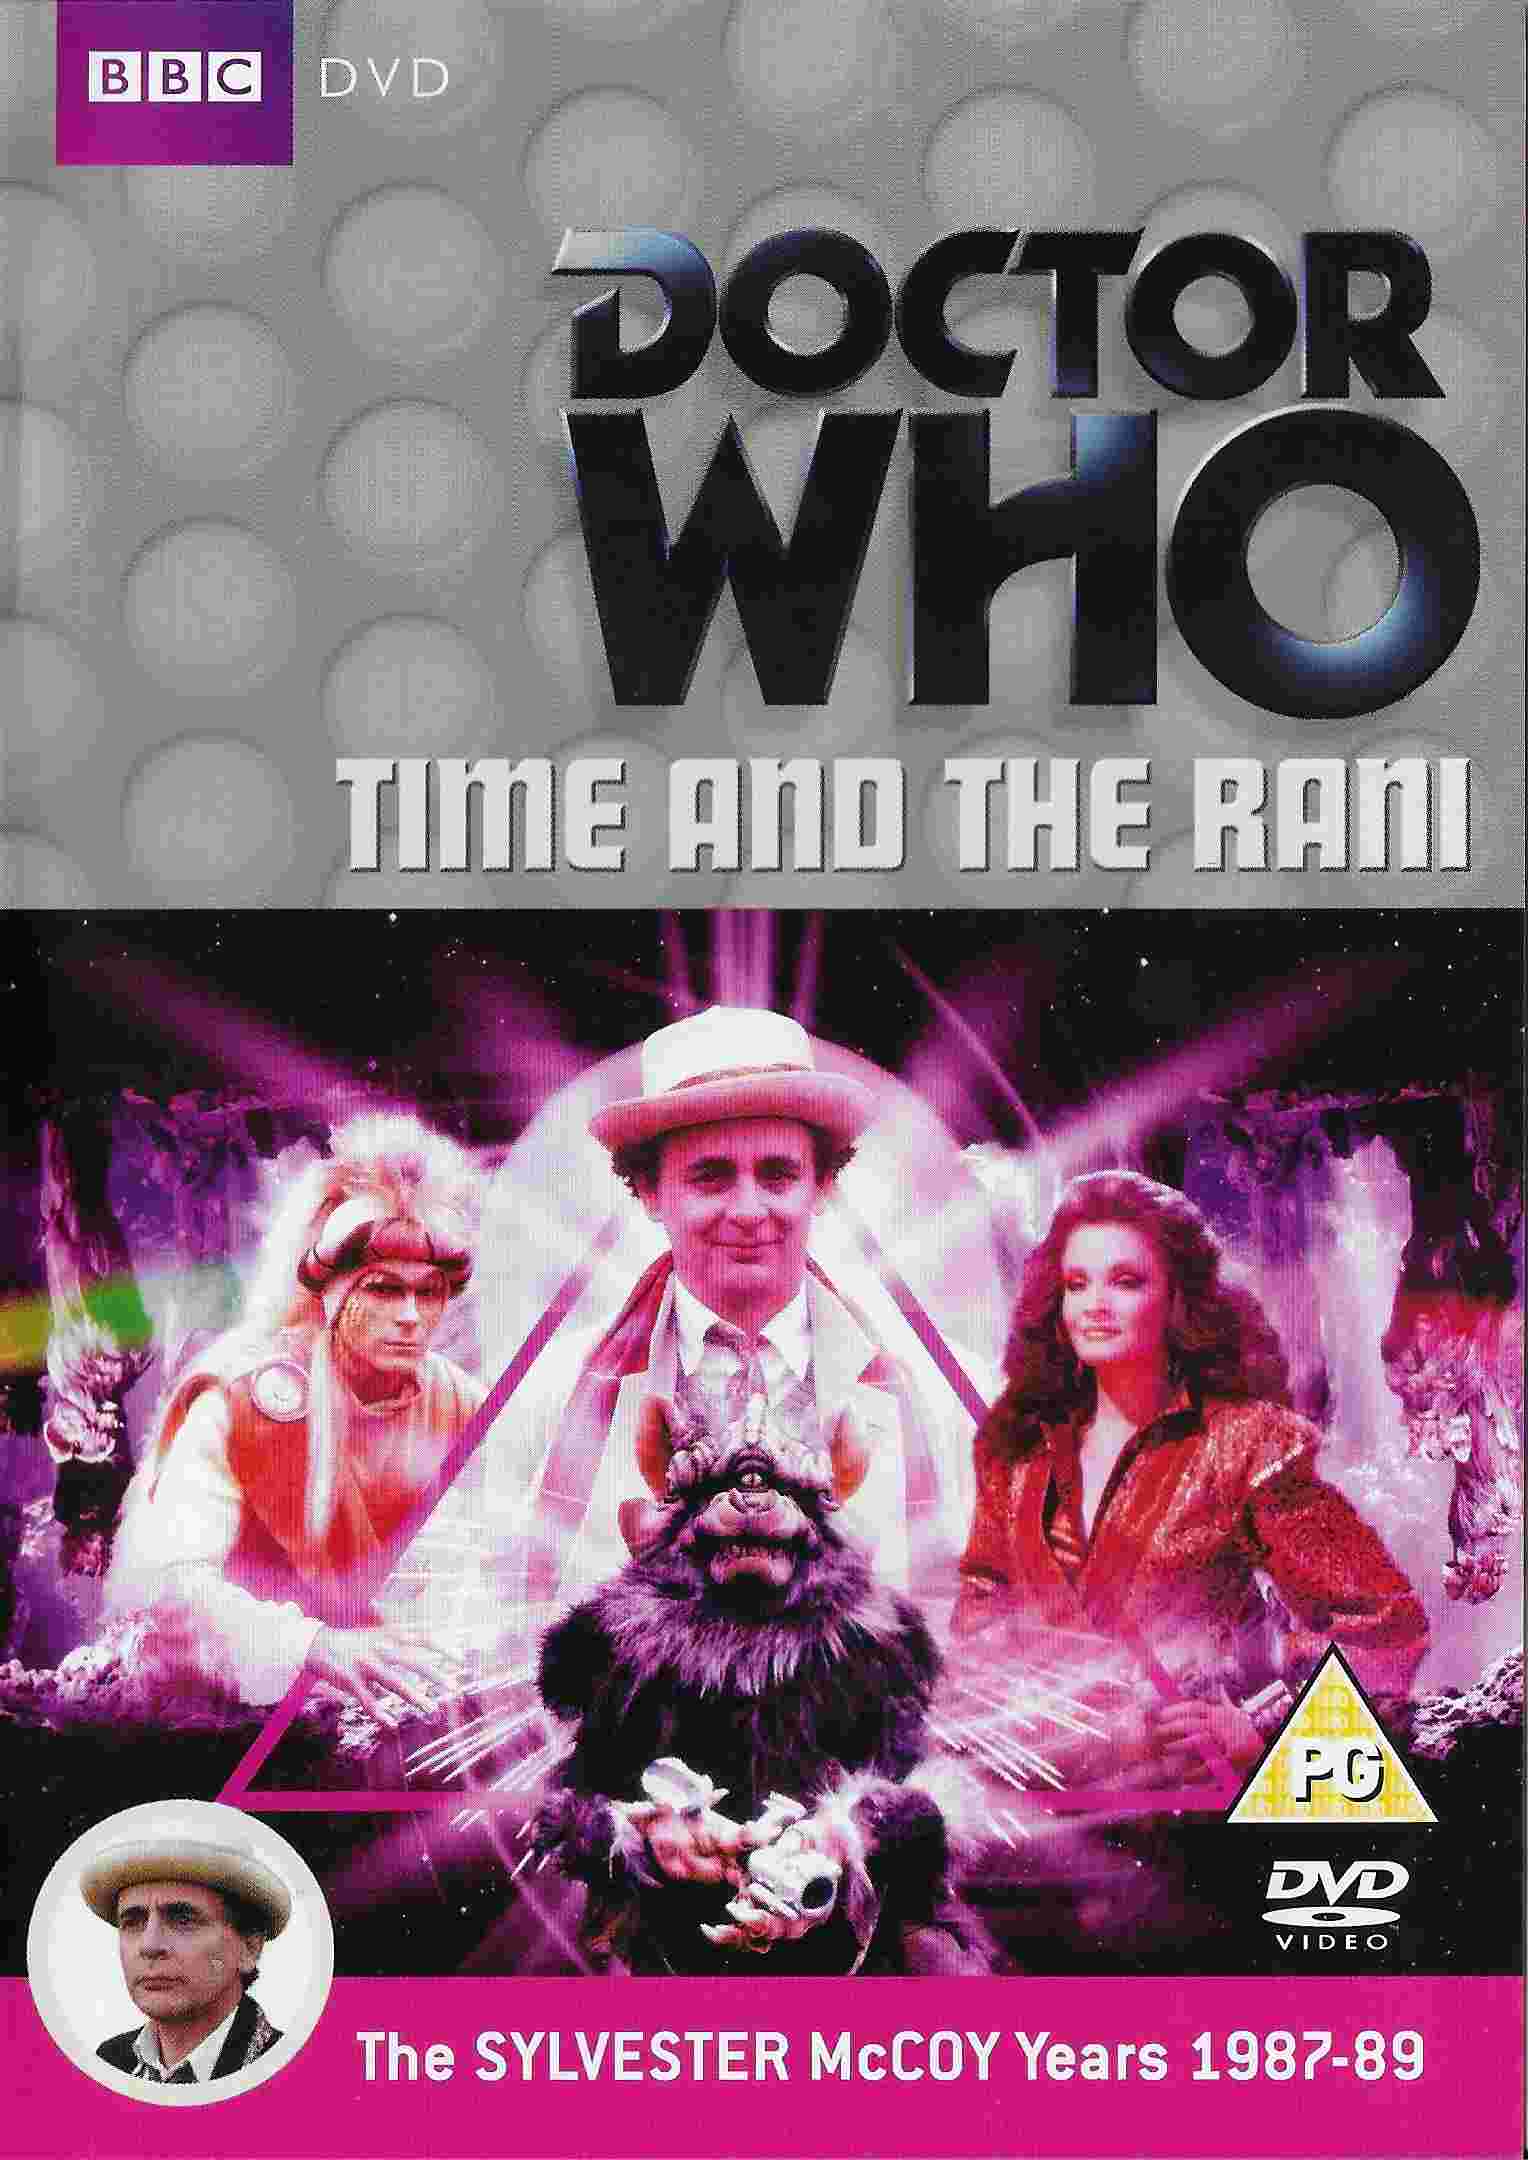 Picture of BBCDVD 2808 Doctor Who - Time and the Rani by artist Pip and Jane Baker from the BBC dvds - Records and Tapes library